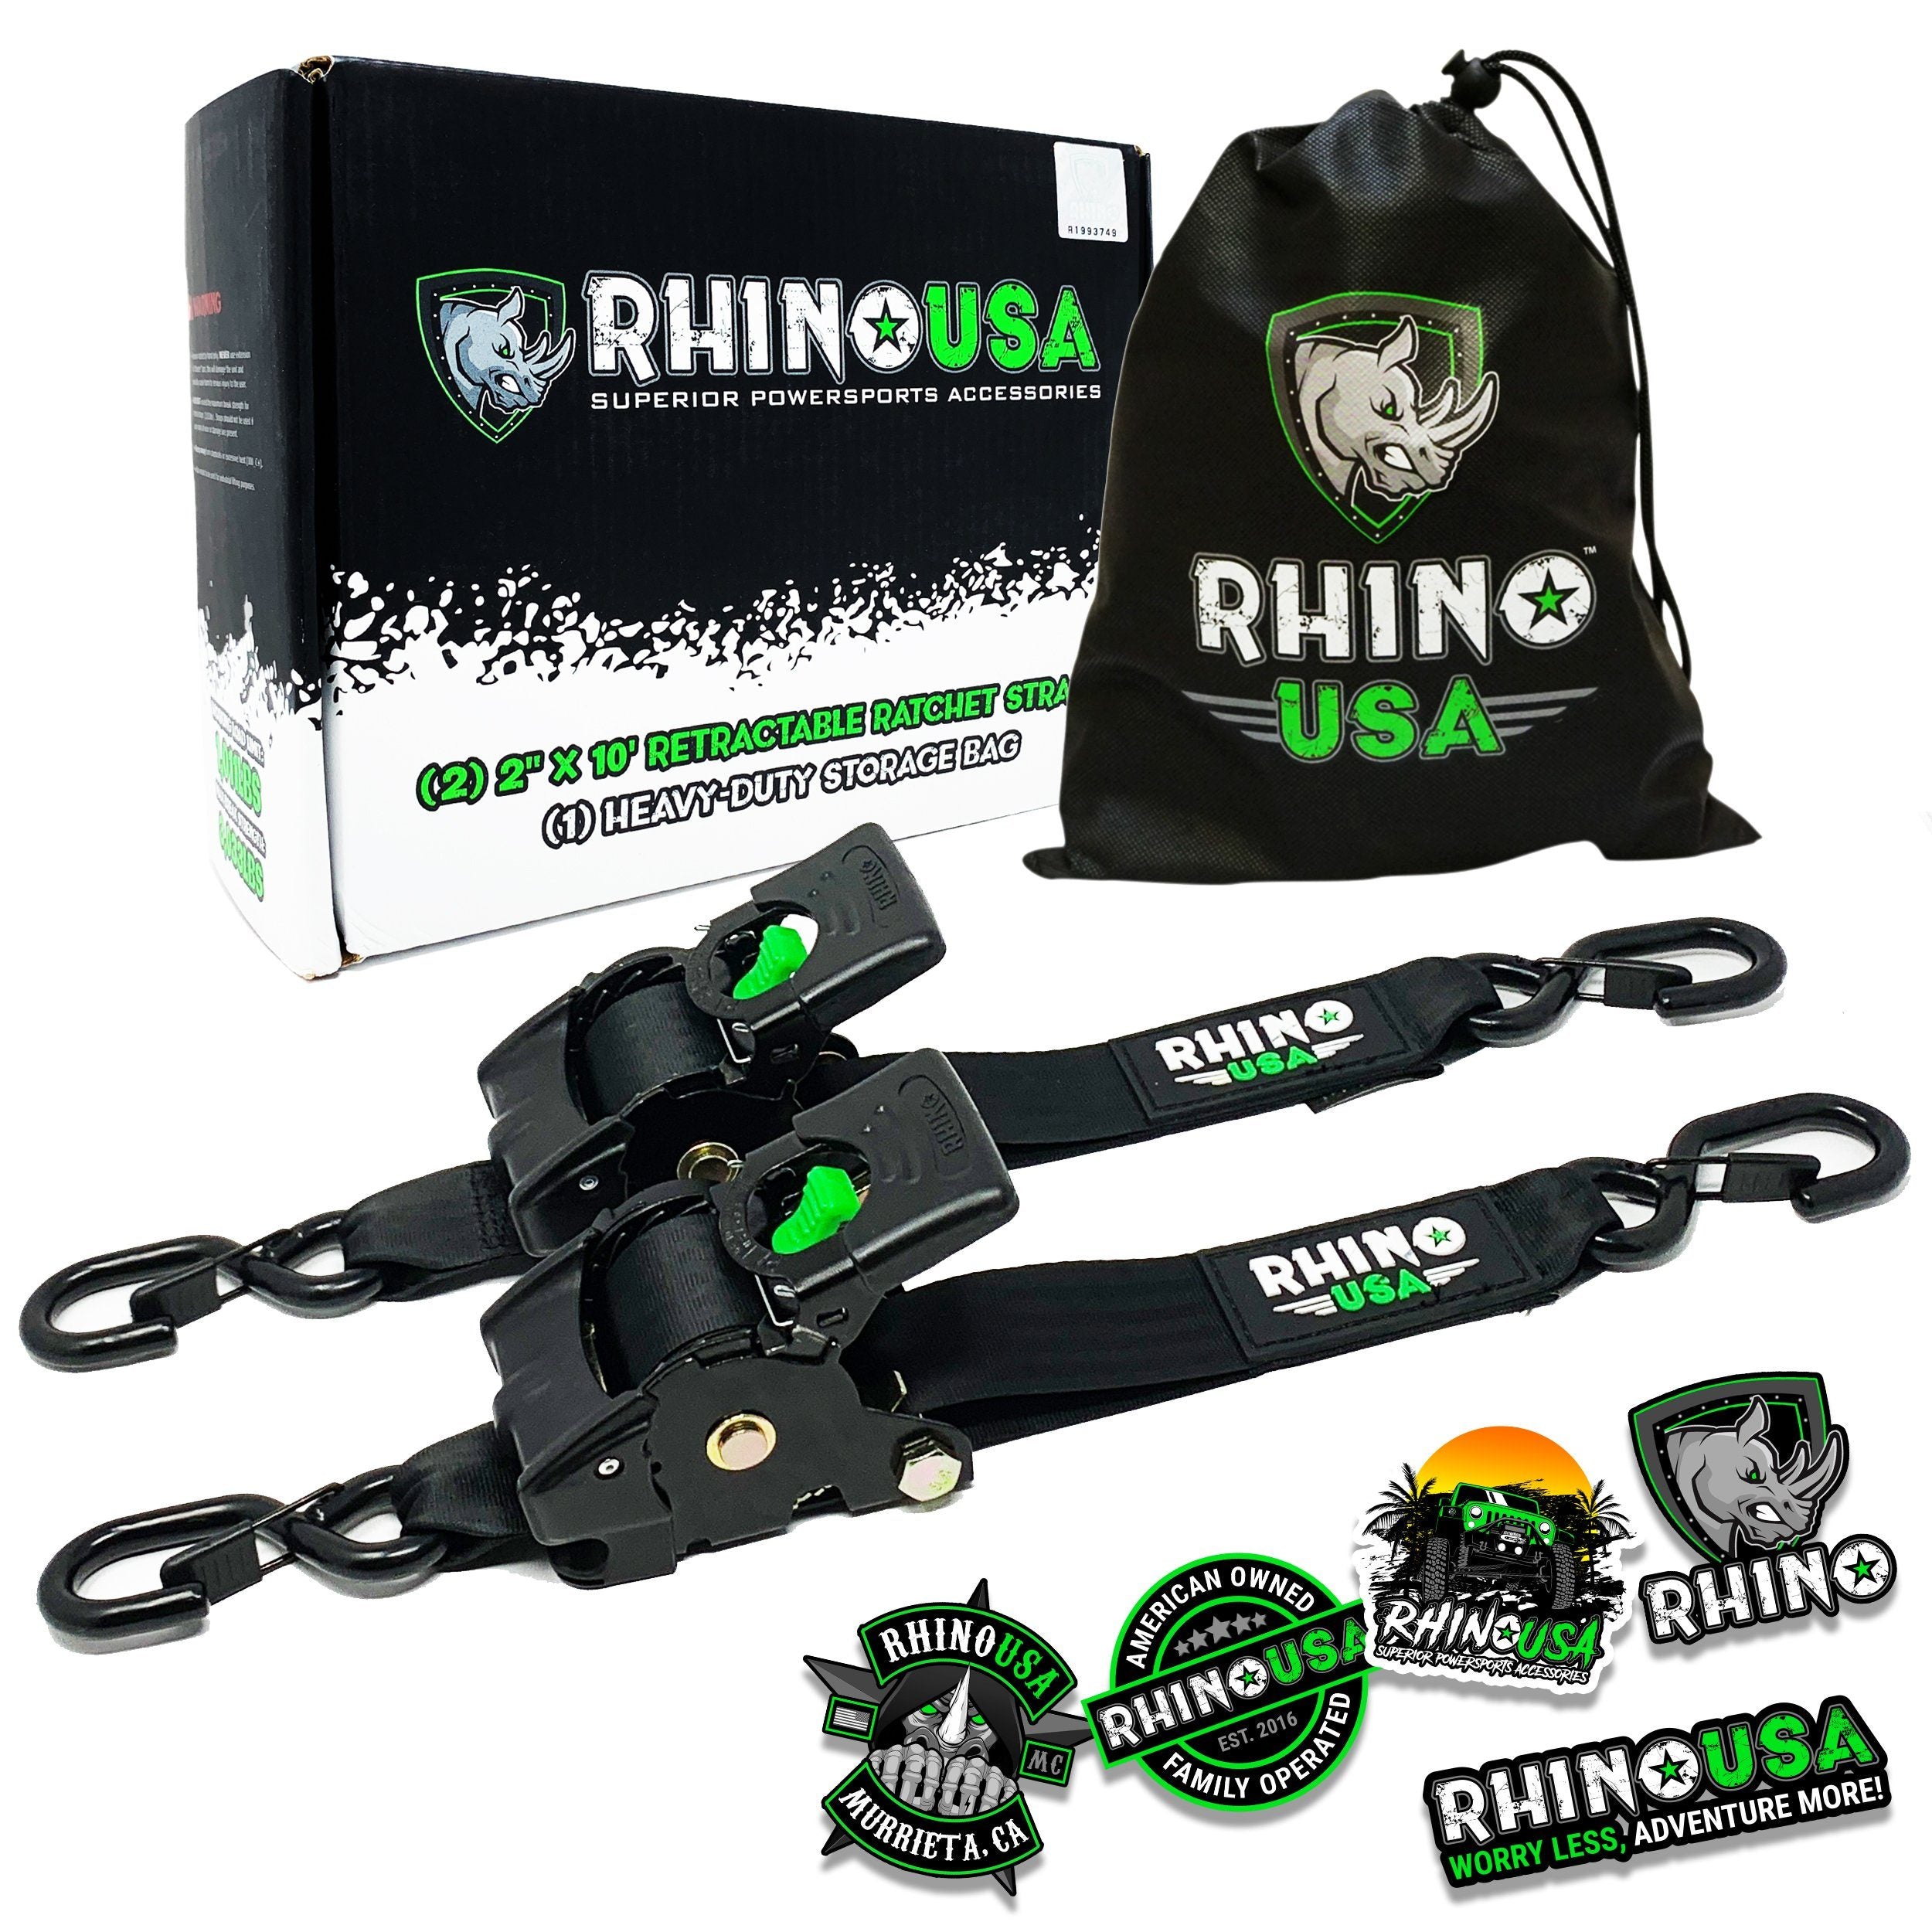 Rhino USA 2 x 20' Ultimate Recovery Tow Strap - Jagged X Offroad